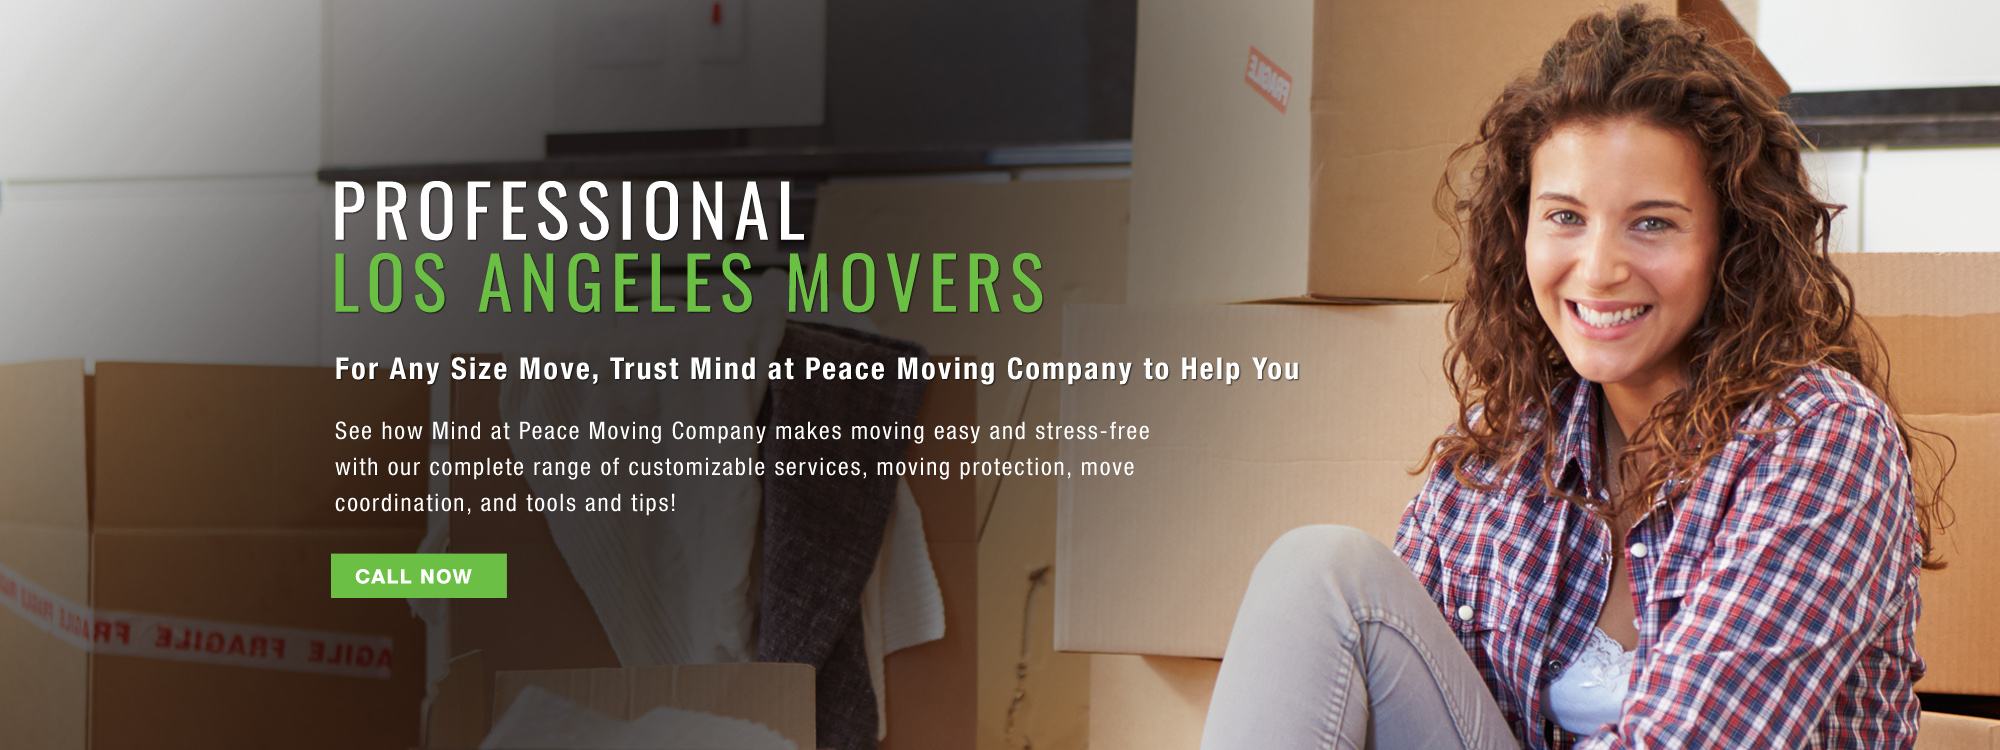 7 Tips to Choose the Right Moving Company - Address Change Services